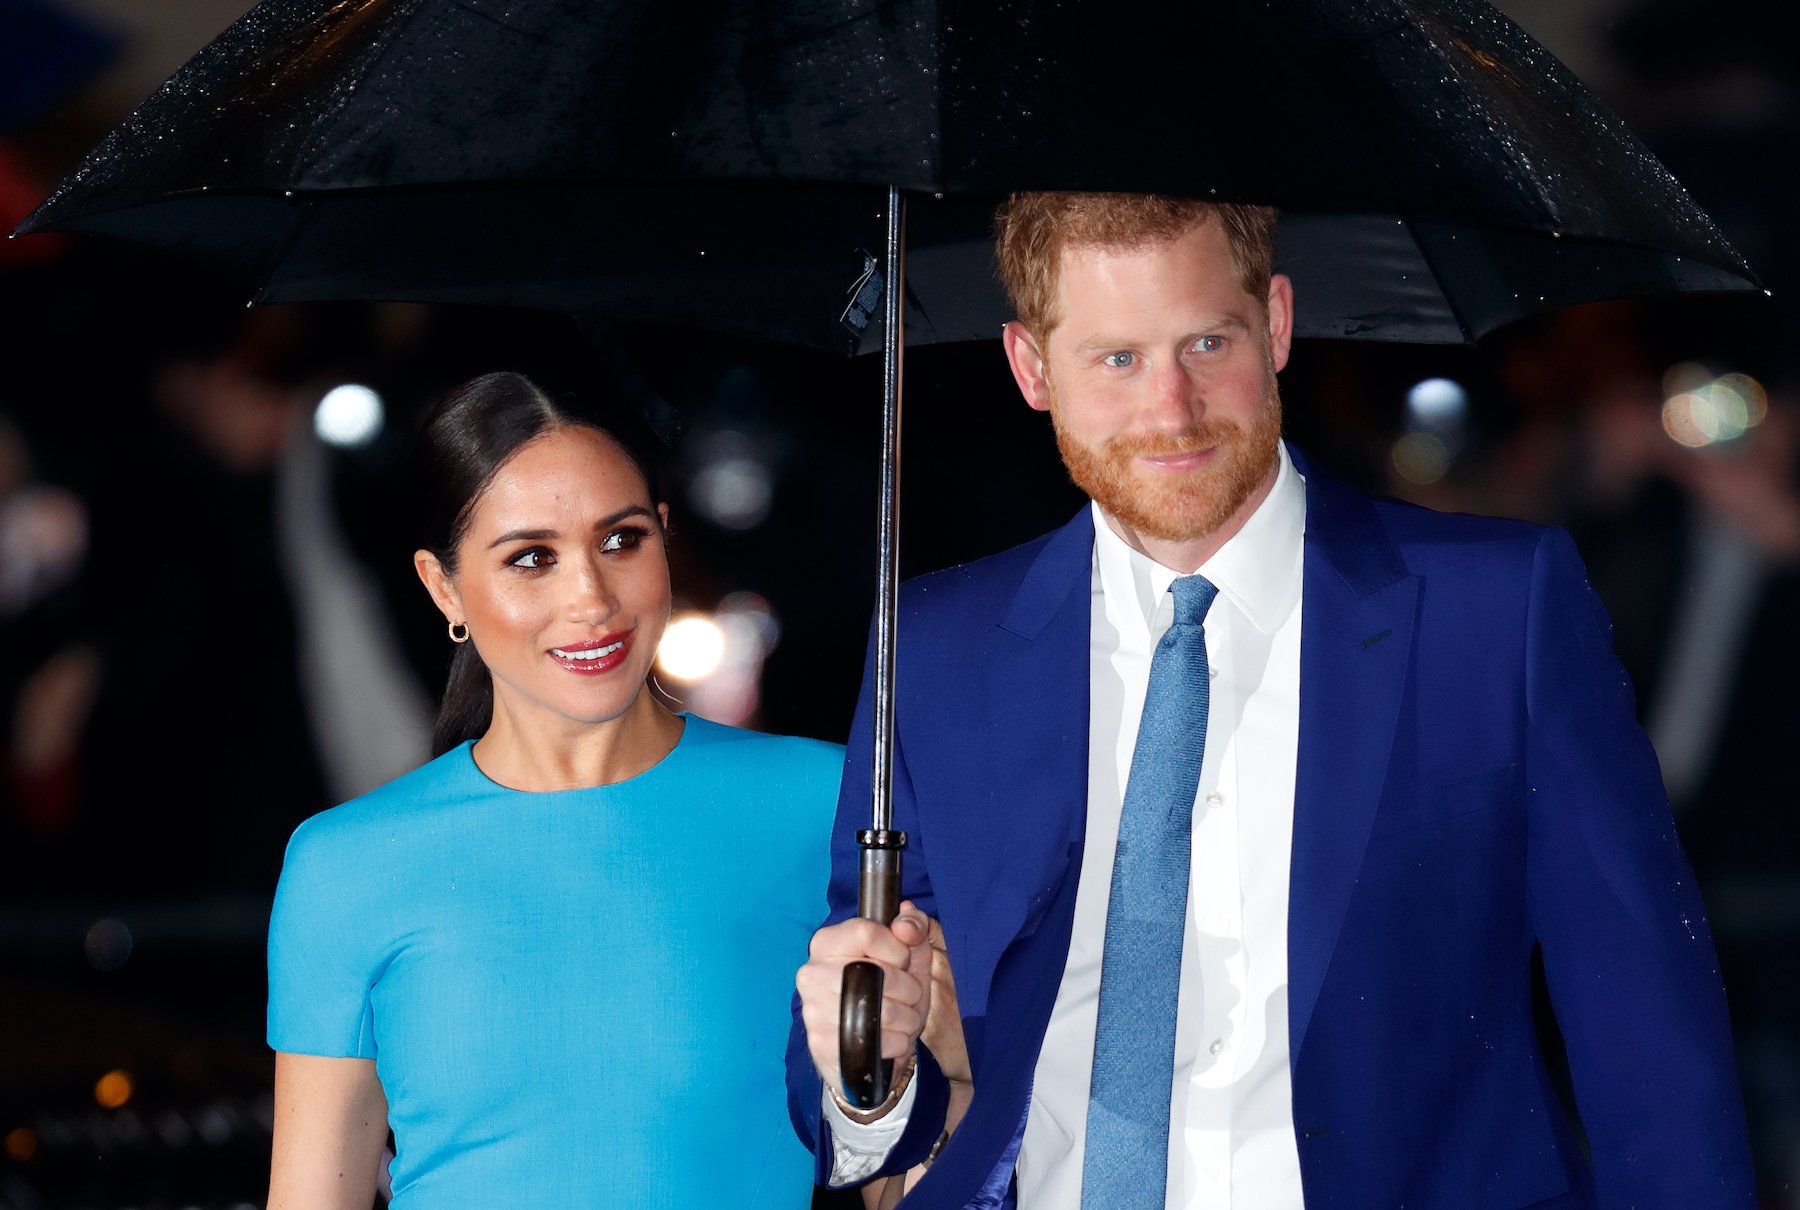 Meghan Markle and Prince Harry at the 2020 Endeavour Fund Awards